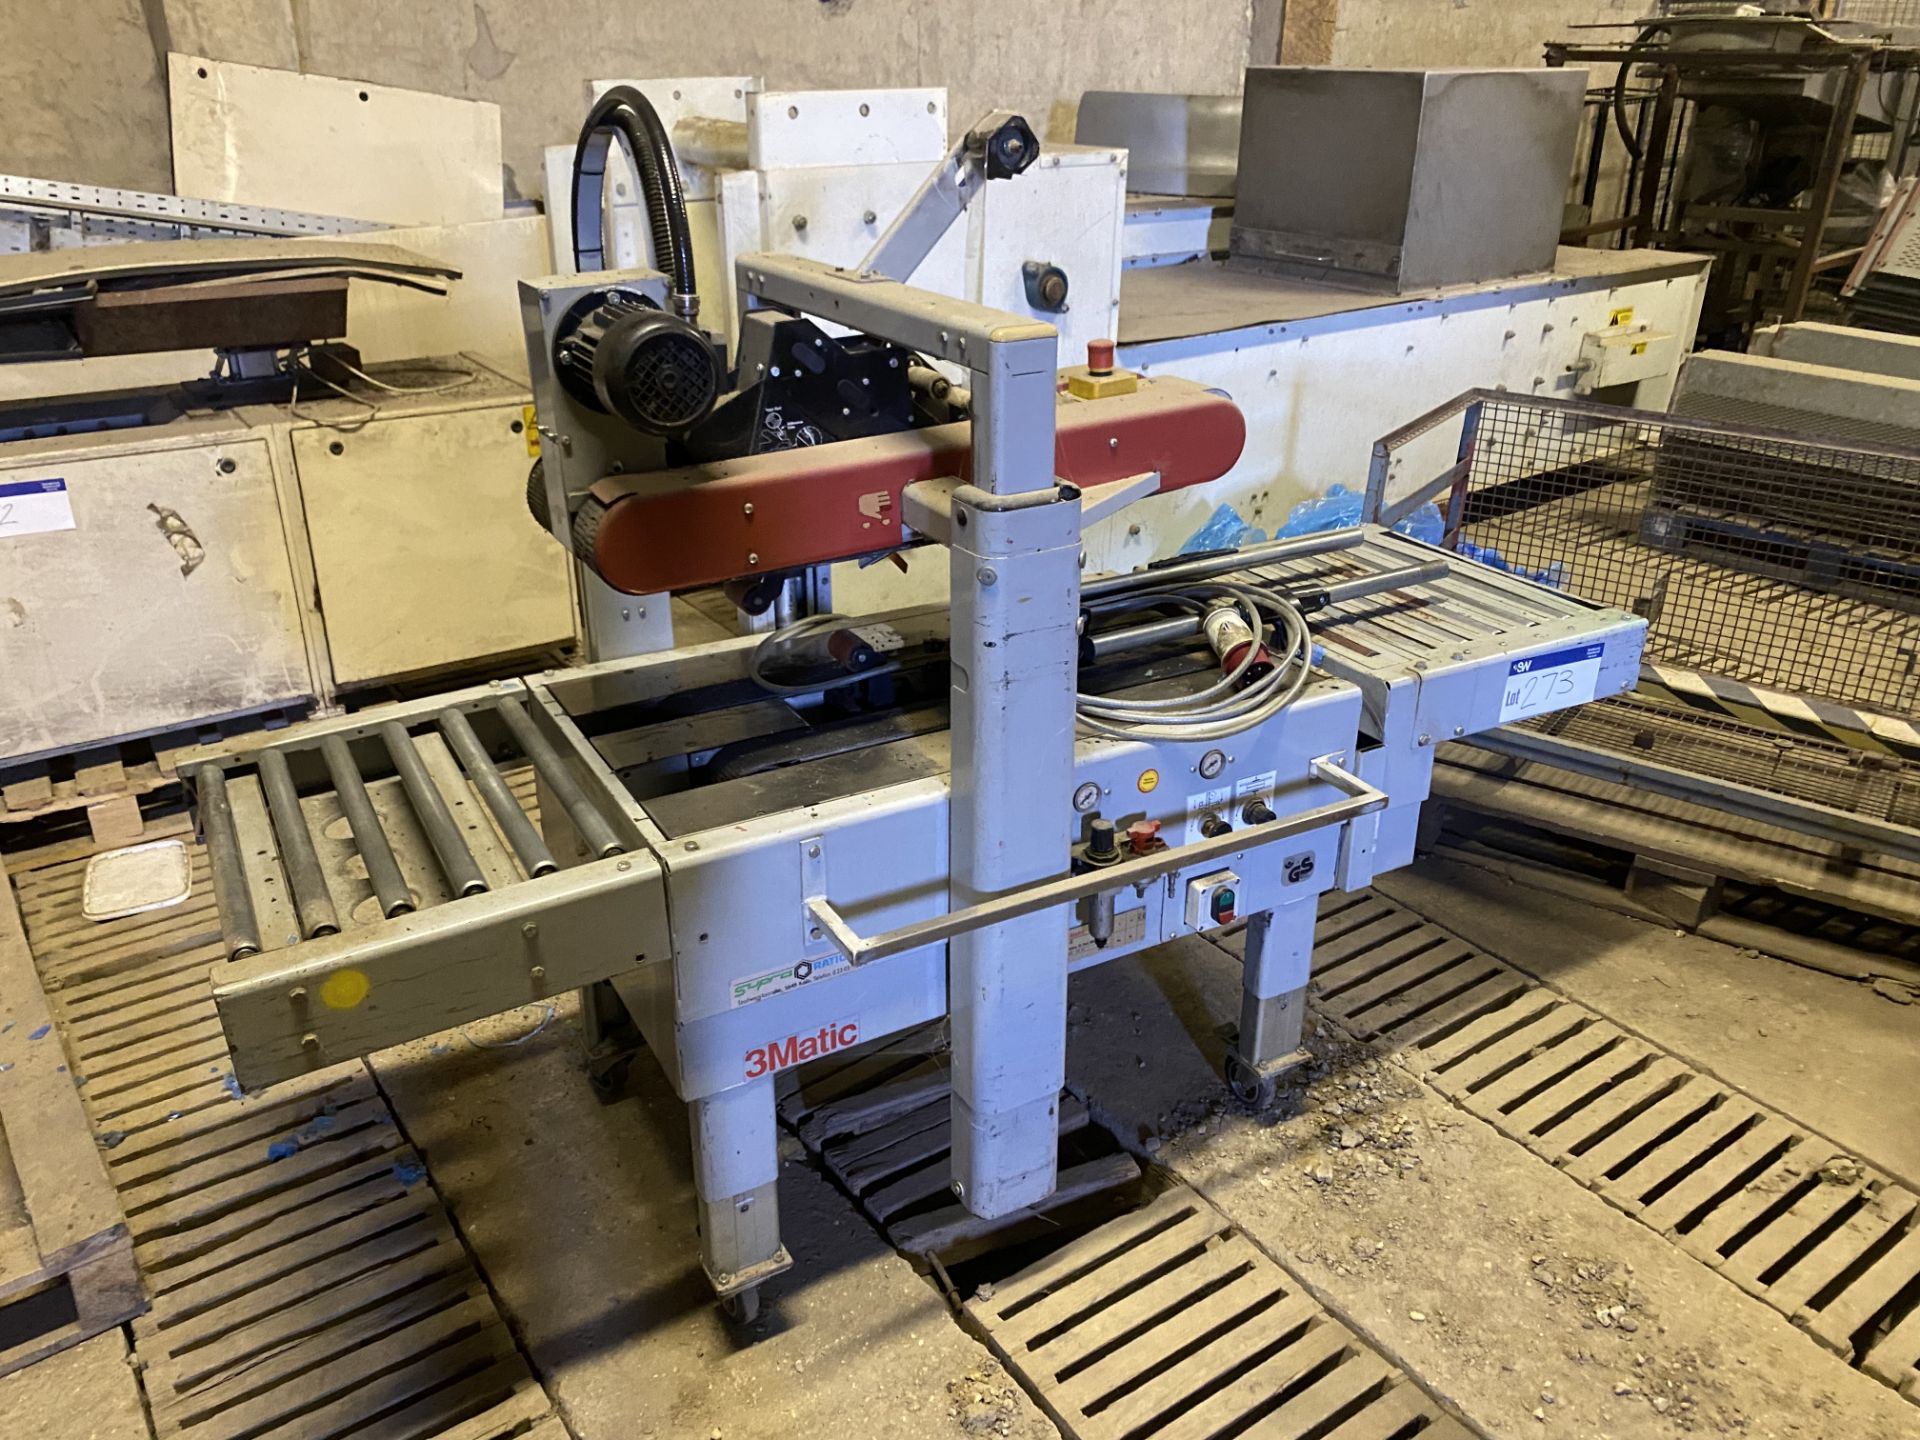 3Matic 39600 Case Taping Machine, serial no. 9452, 380V, 480mm wide on rollers. Site location - Image 2 of 5